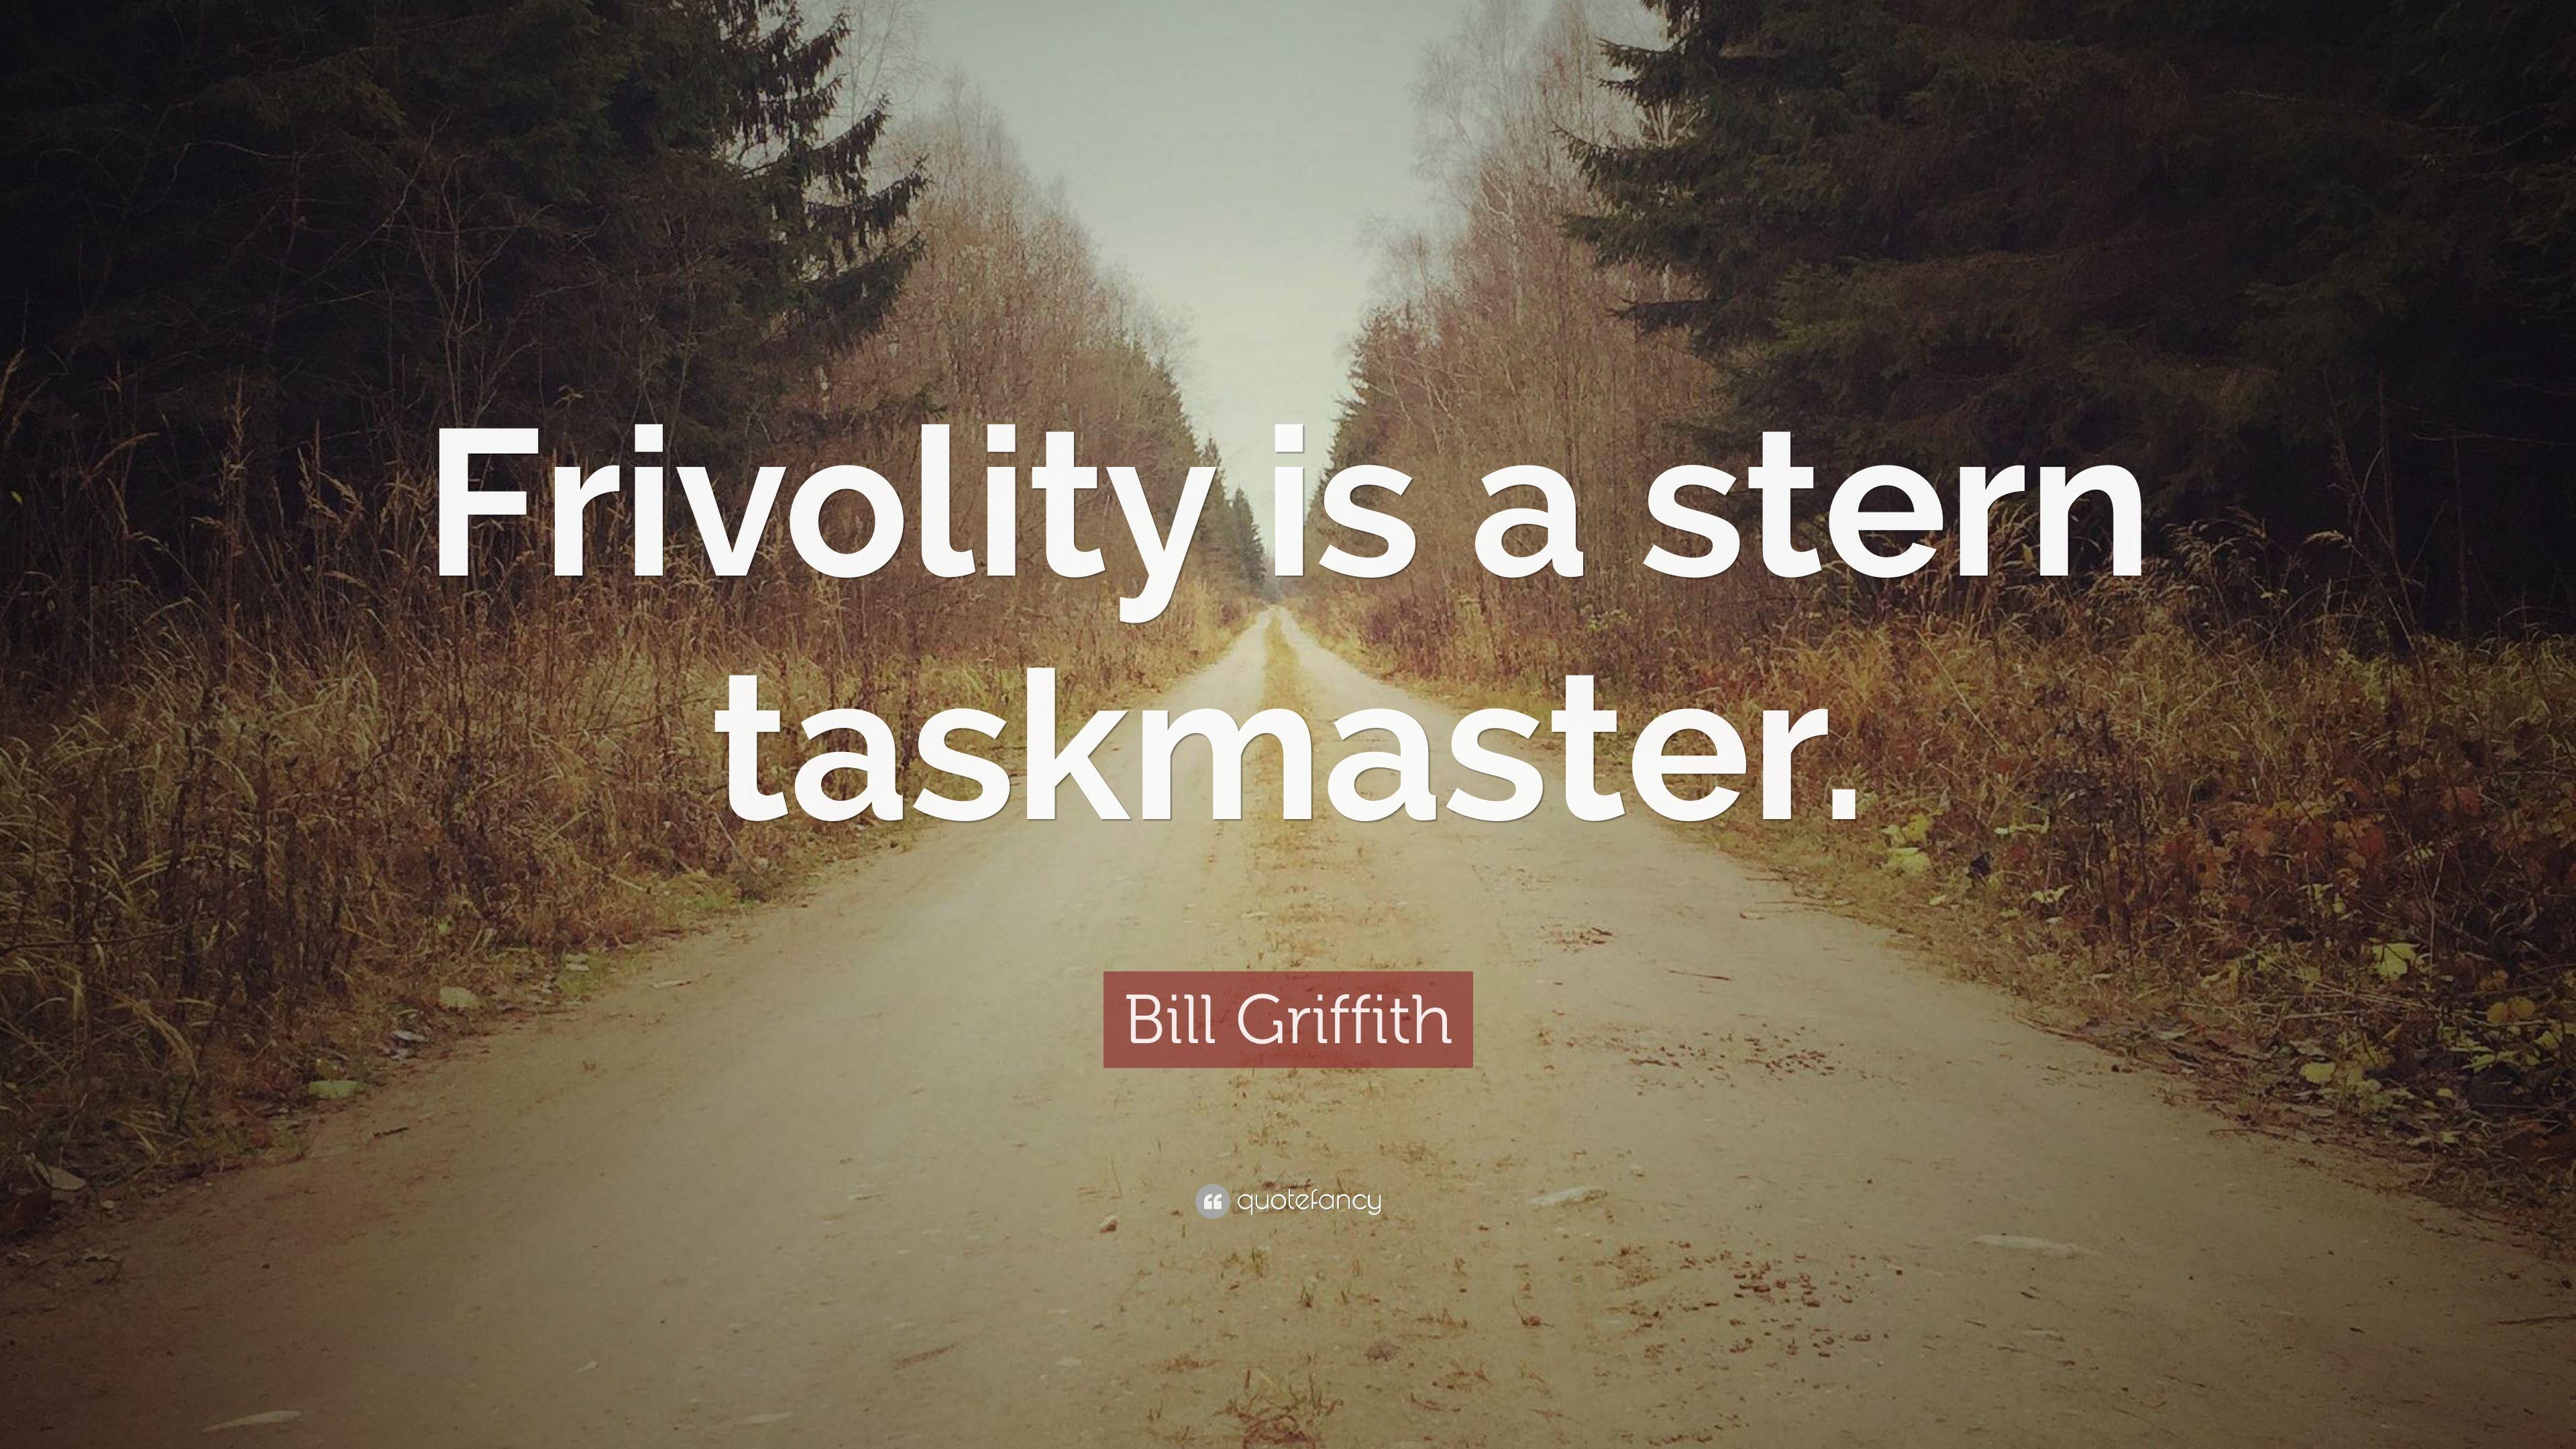 Bill Griffith Quote: “Frivolity is a stern taskmaster.” 7